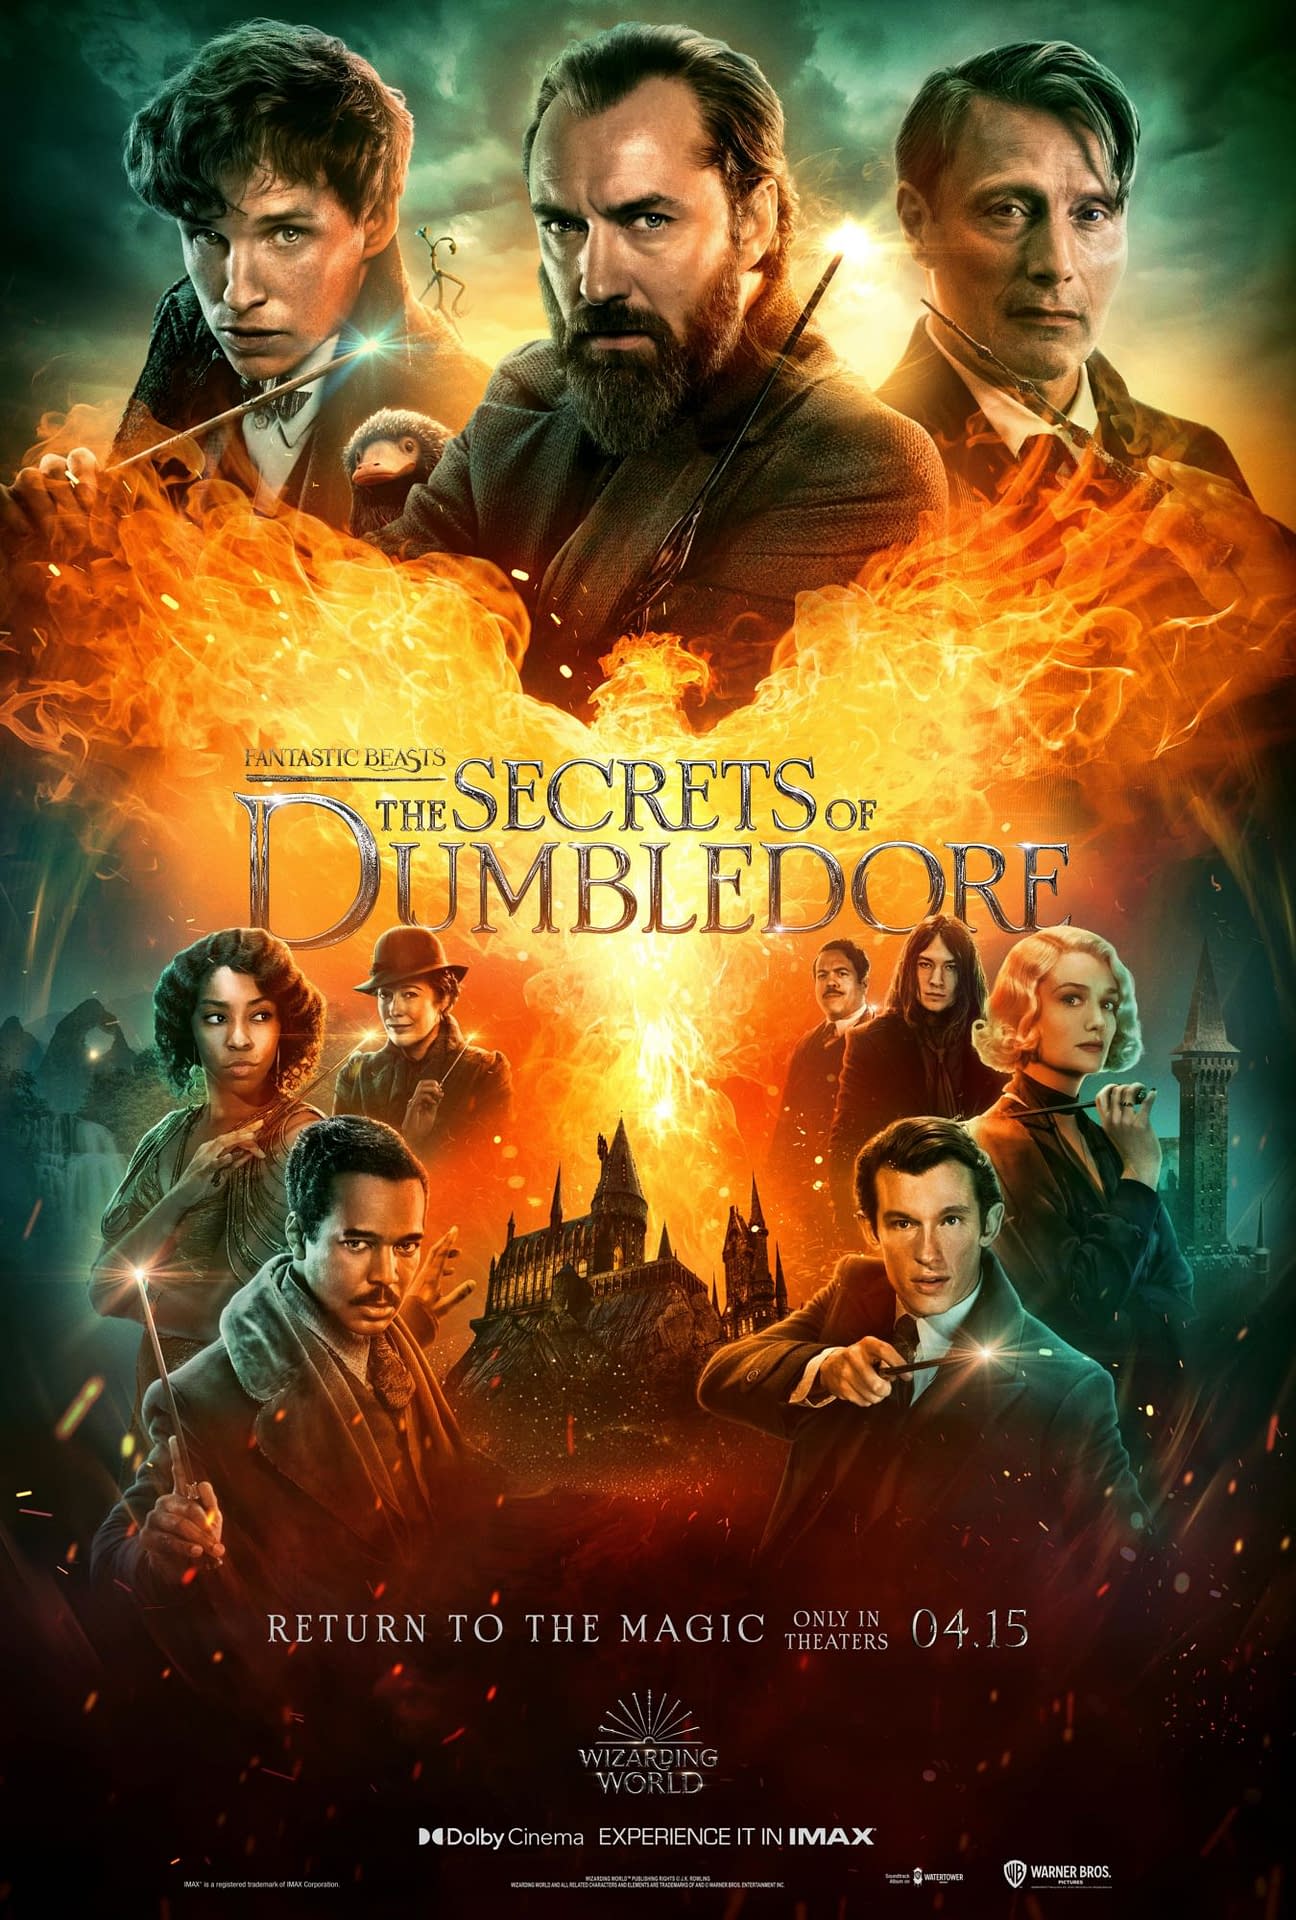 Fantastic Beasts: The Secrets of Dumbledore - New Poster and Trailer